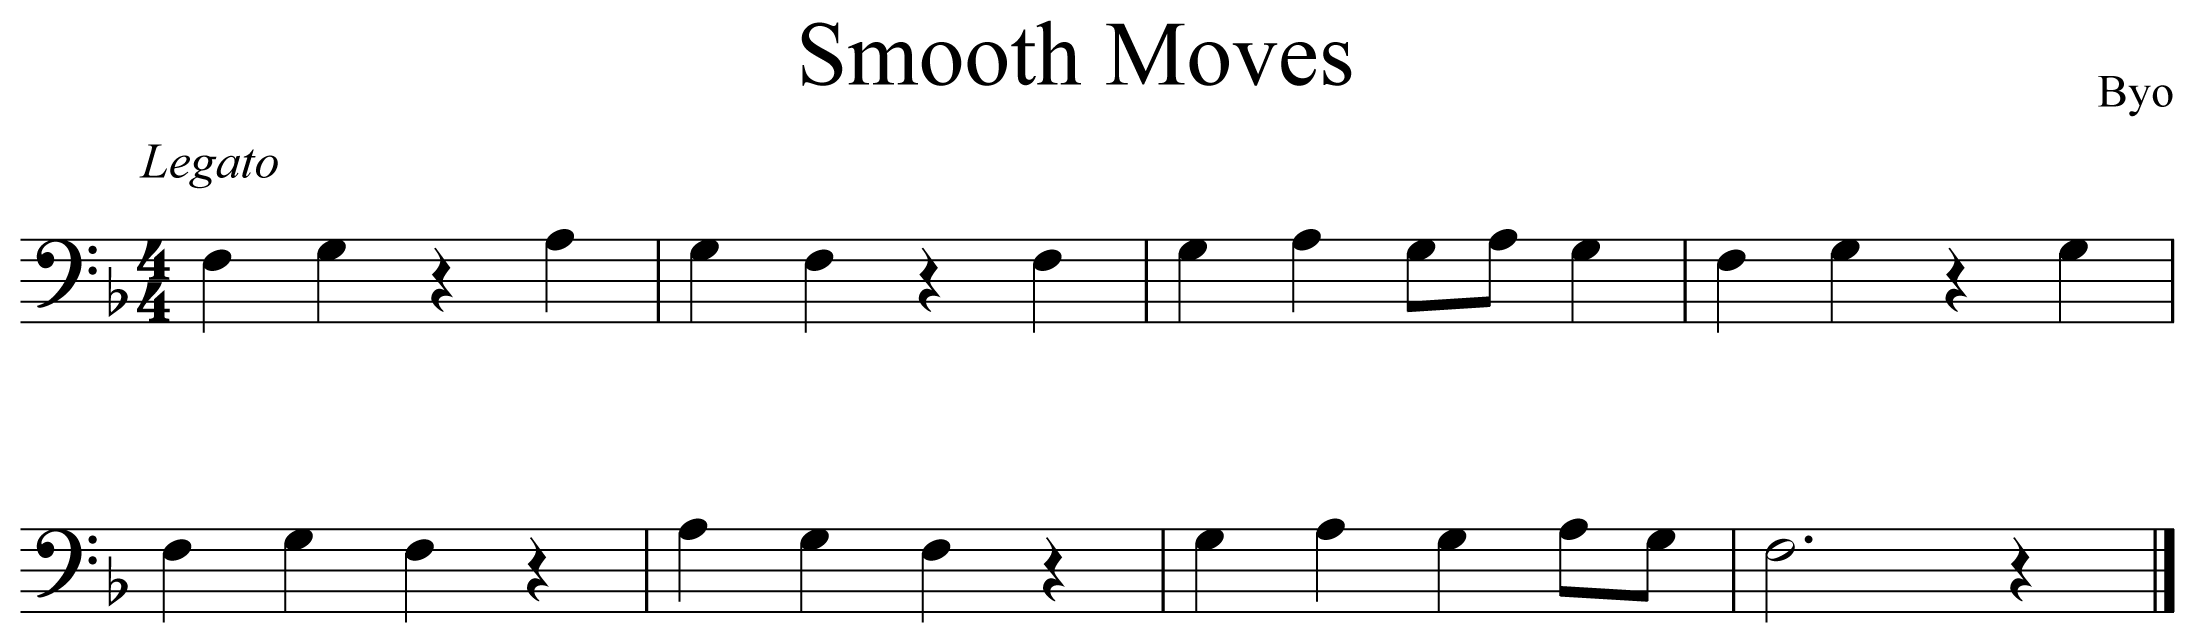 Smooth Moves Music Notation Trombone